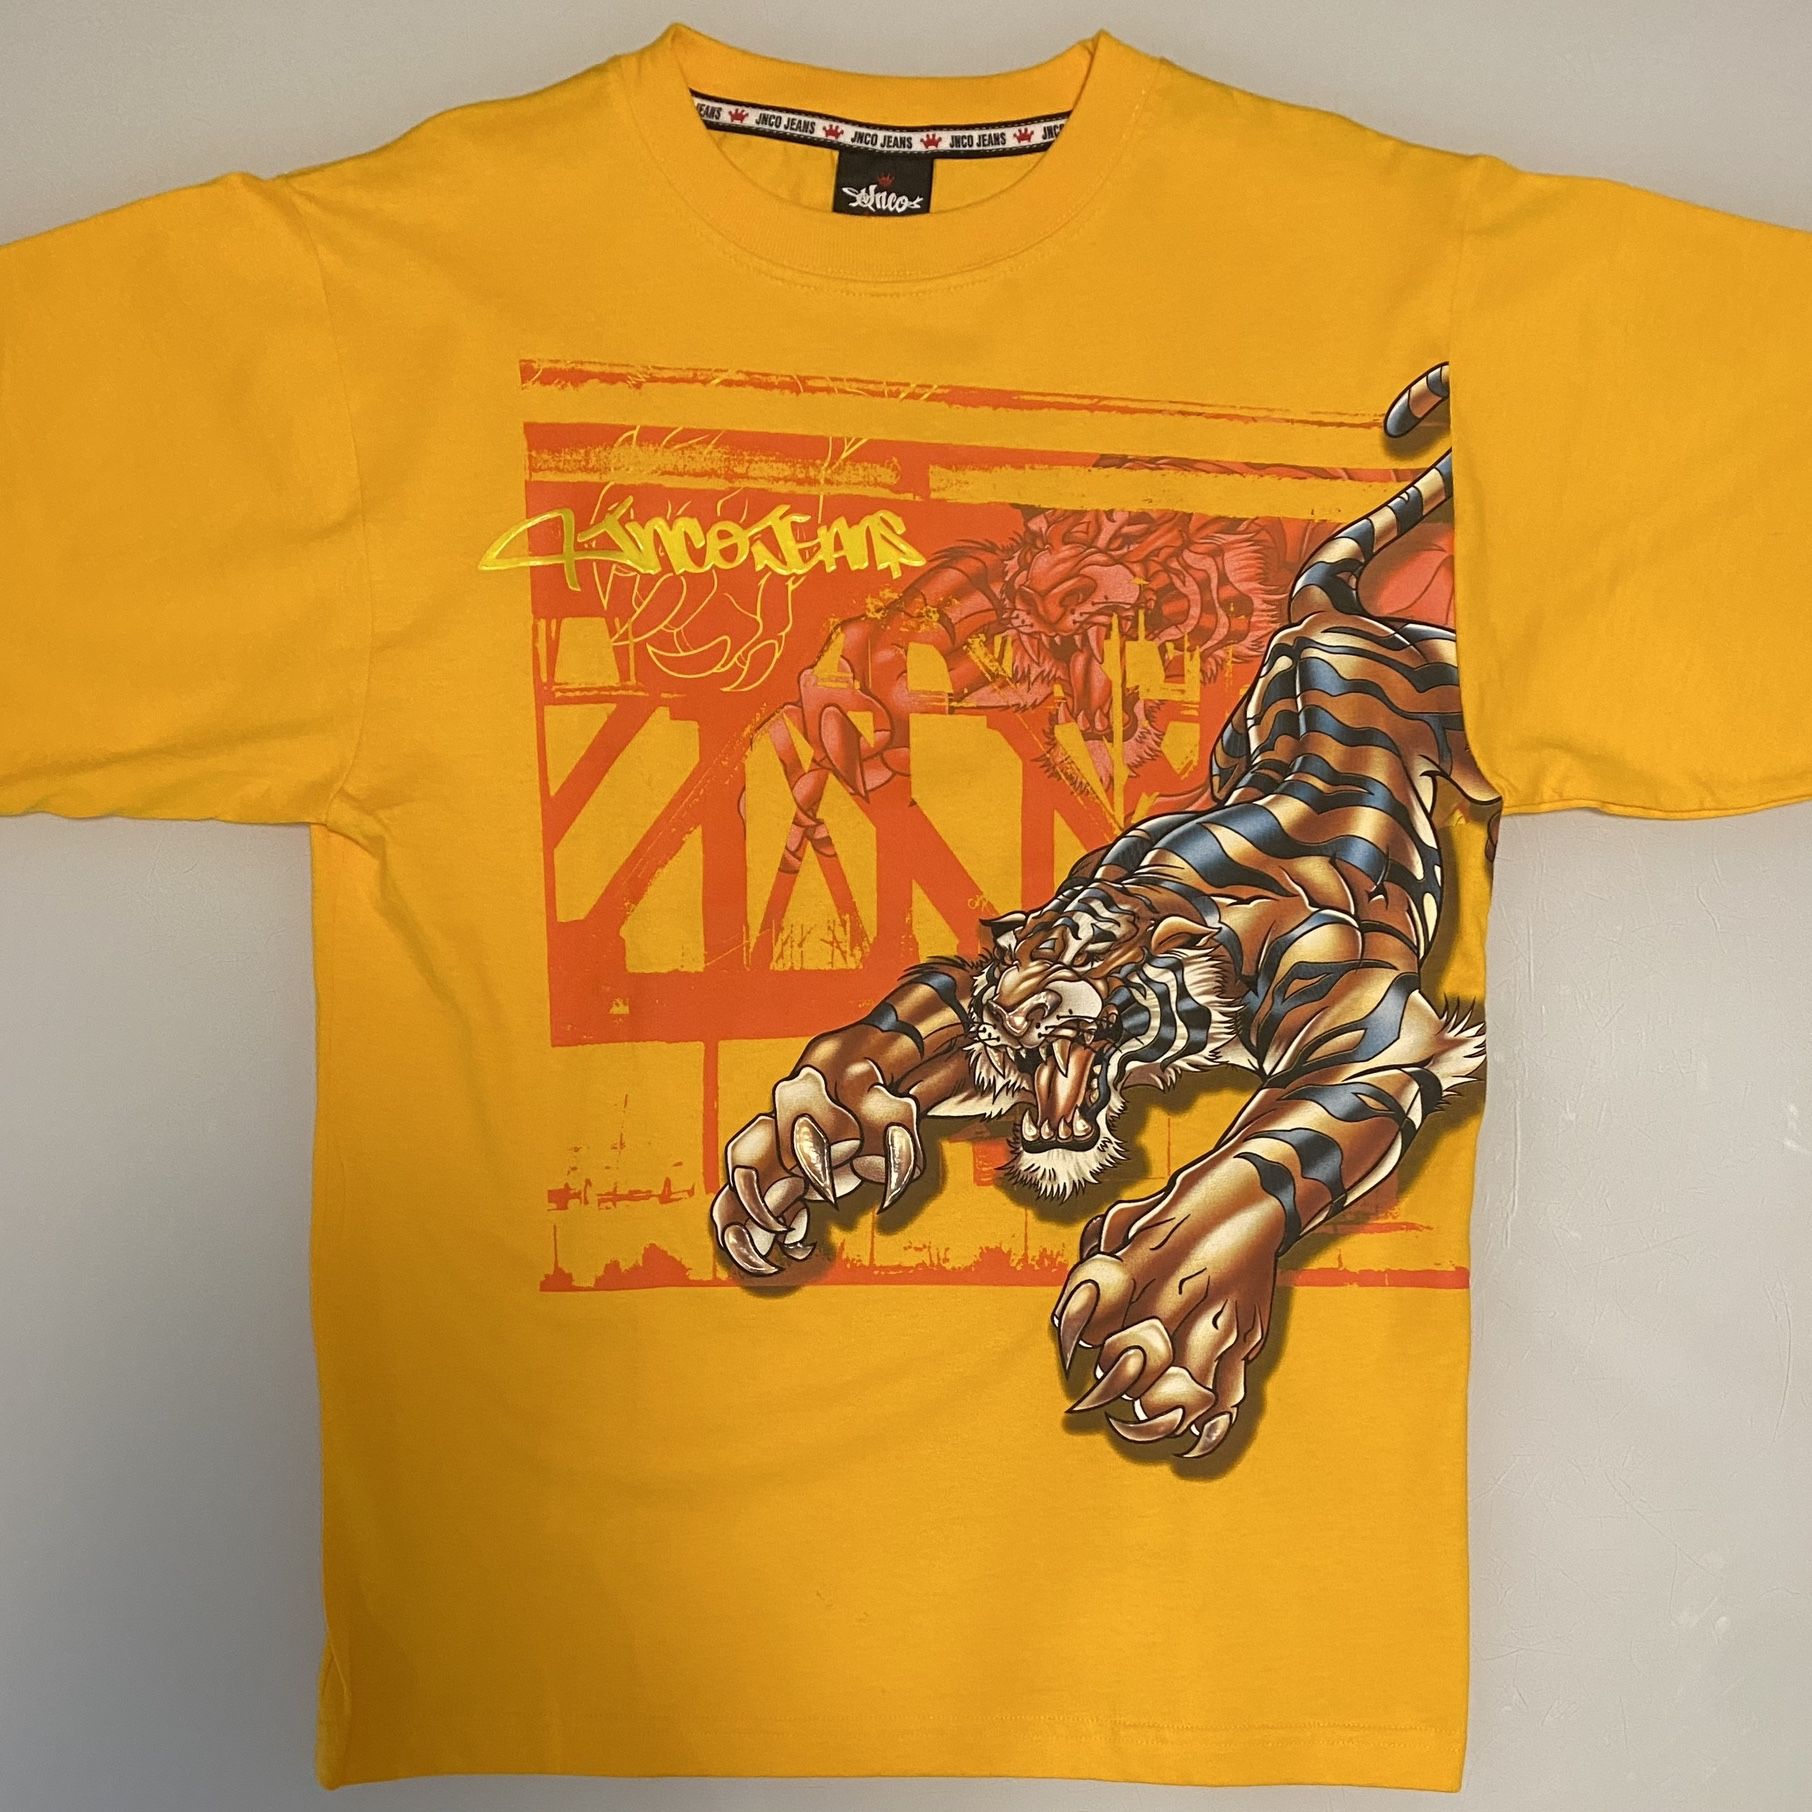 jnco Jeans T-shirt, size XL, featuring a tiger on the fron